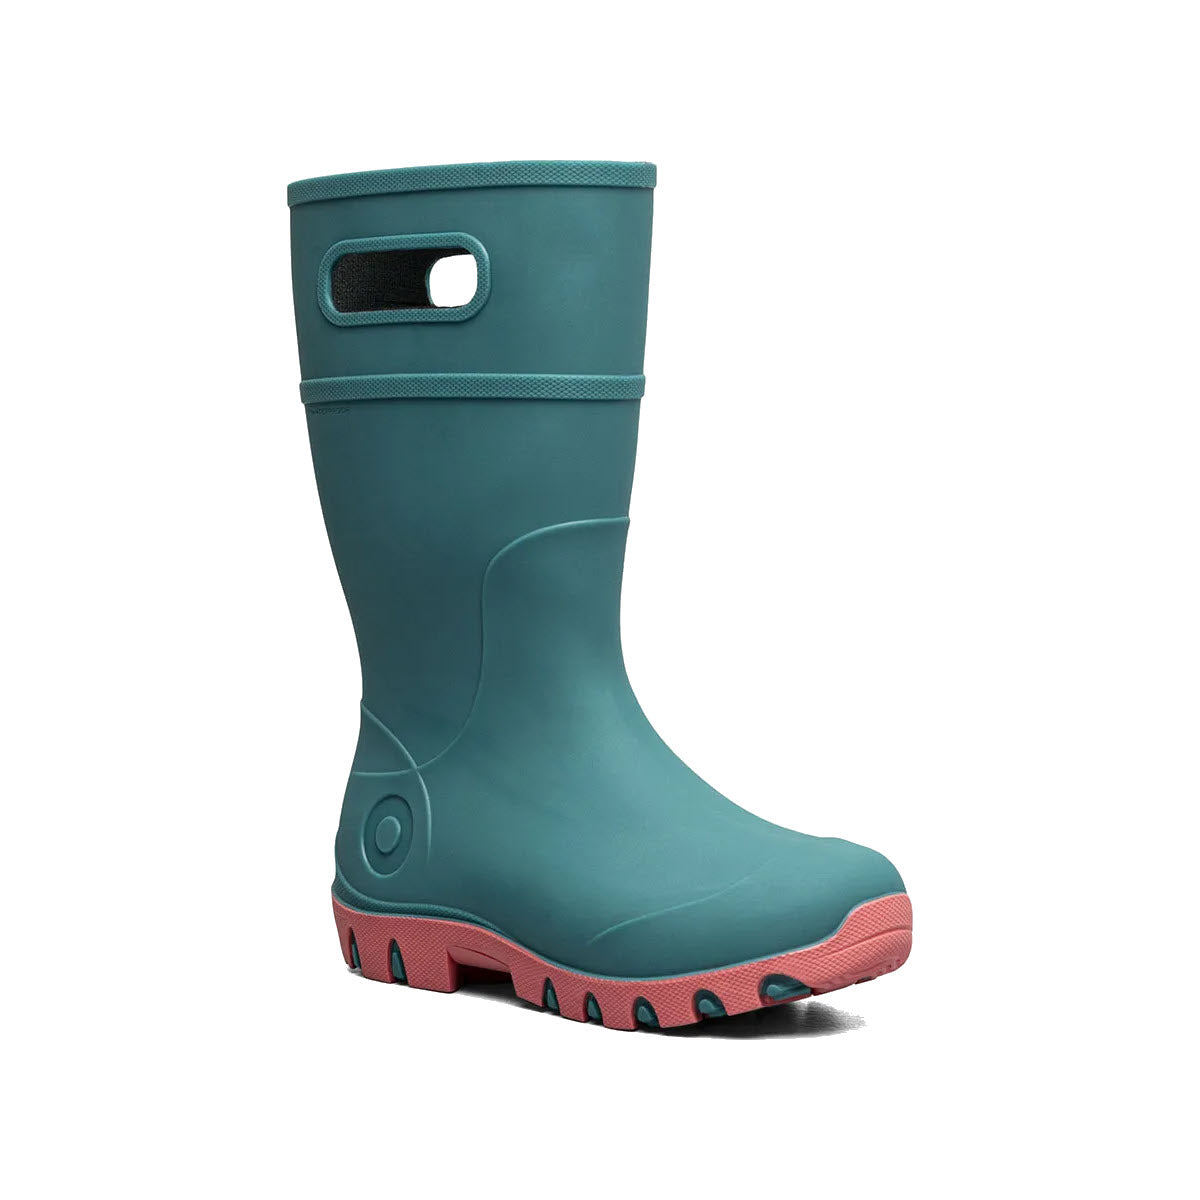 A teal rubber boot with a red sole and a handle at the top, featuring waterproof construction, isolated on a white background, like the BOGS ESSENTIAL RAIN TALL TURQUOISE - KIDS by Bogs.